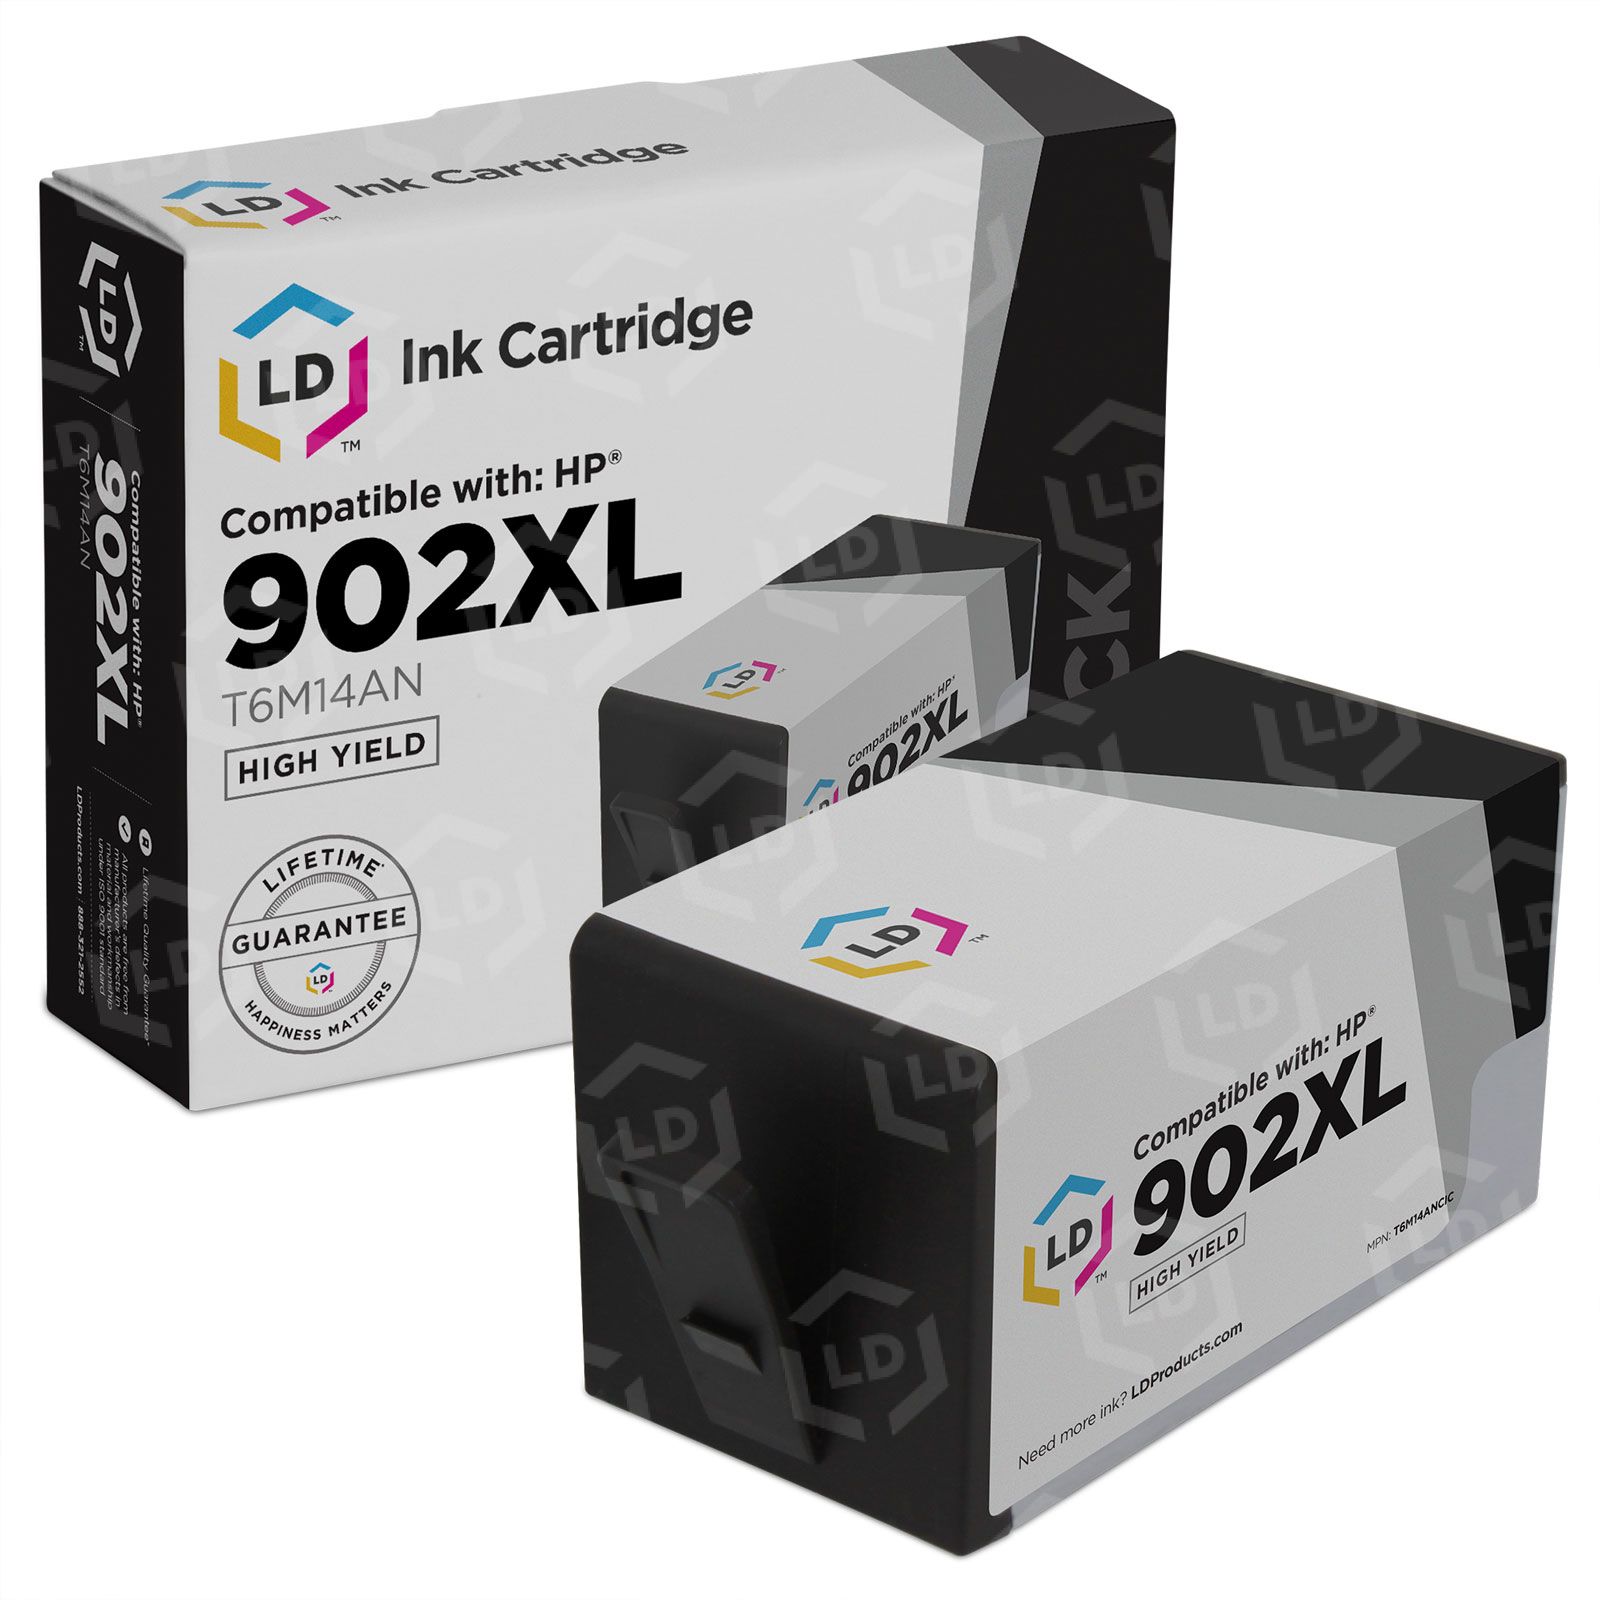 902XL Ink Cartridge Replacement for HP 902XL Ink Cartridge Work